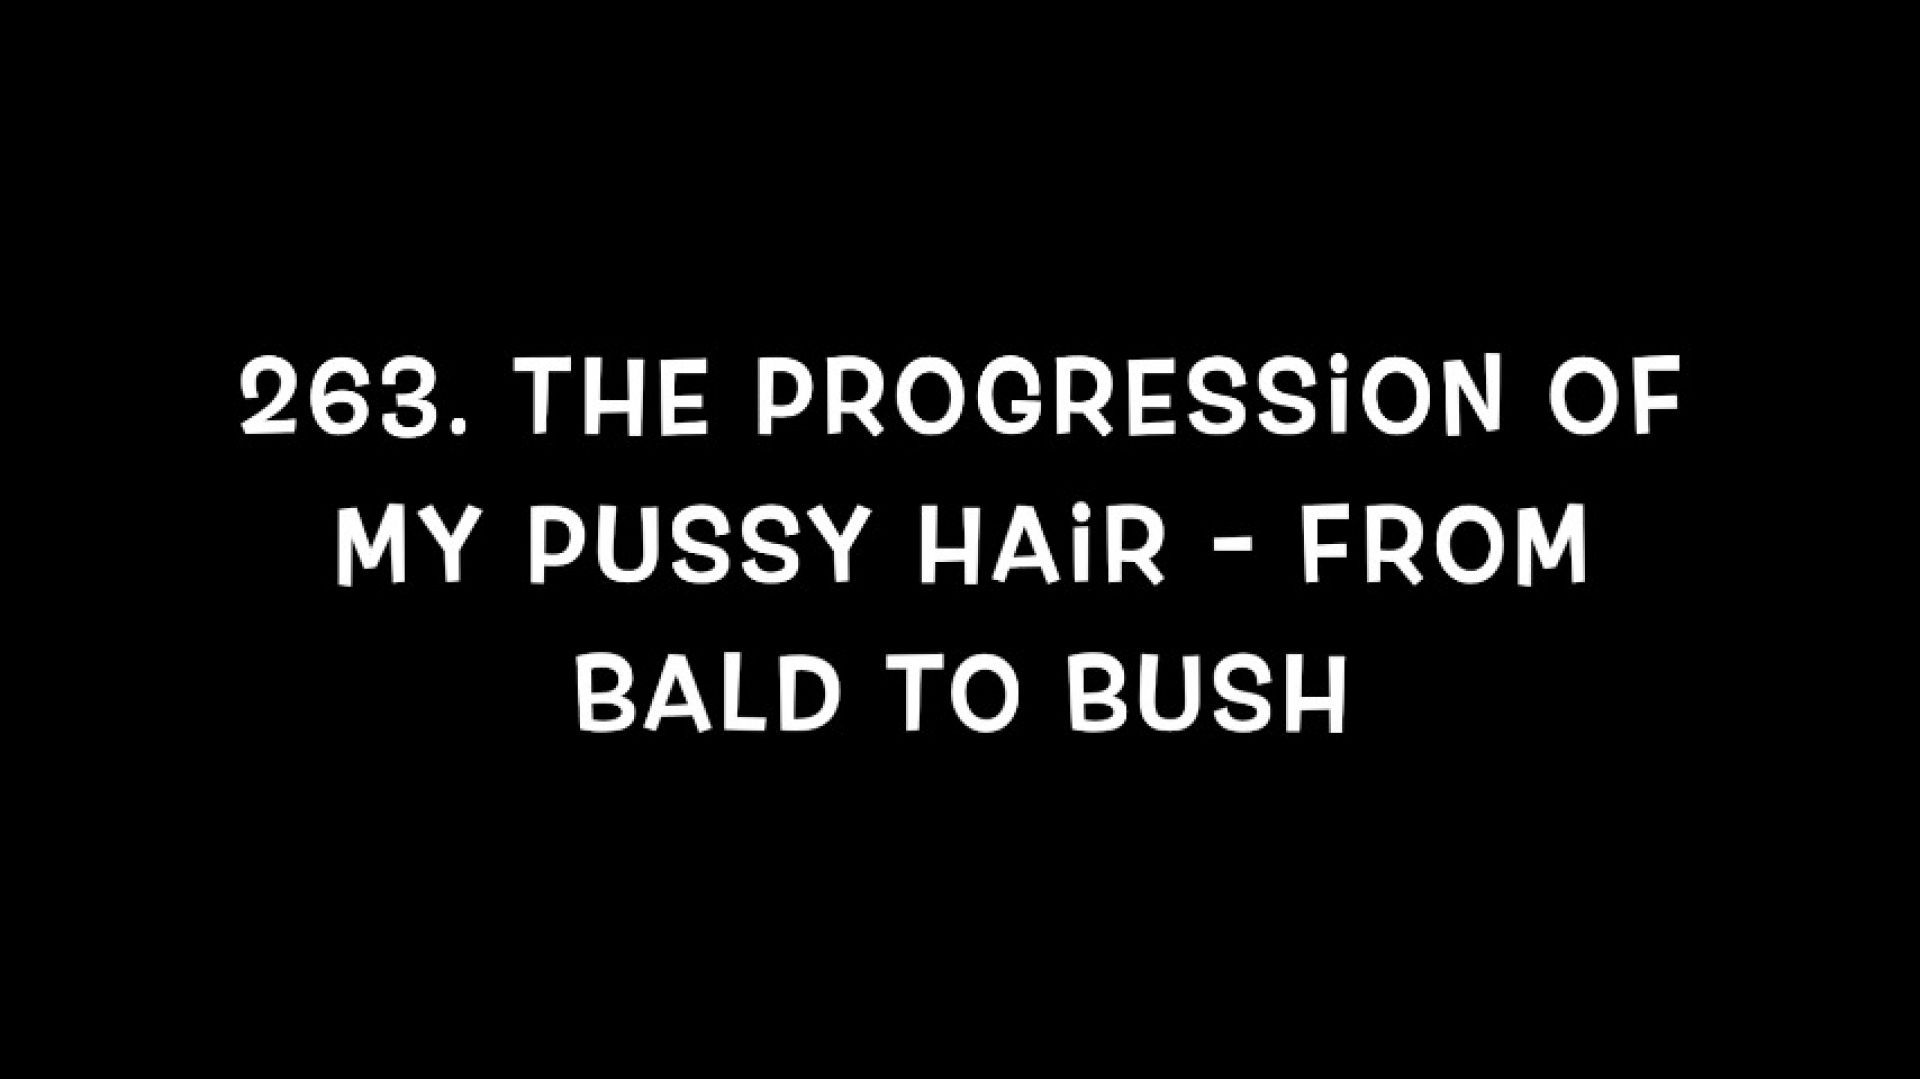 263. The Progression of my Pussy Hair - from bald to bush